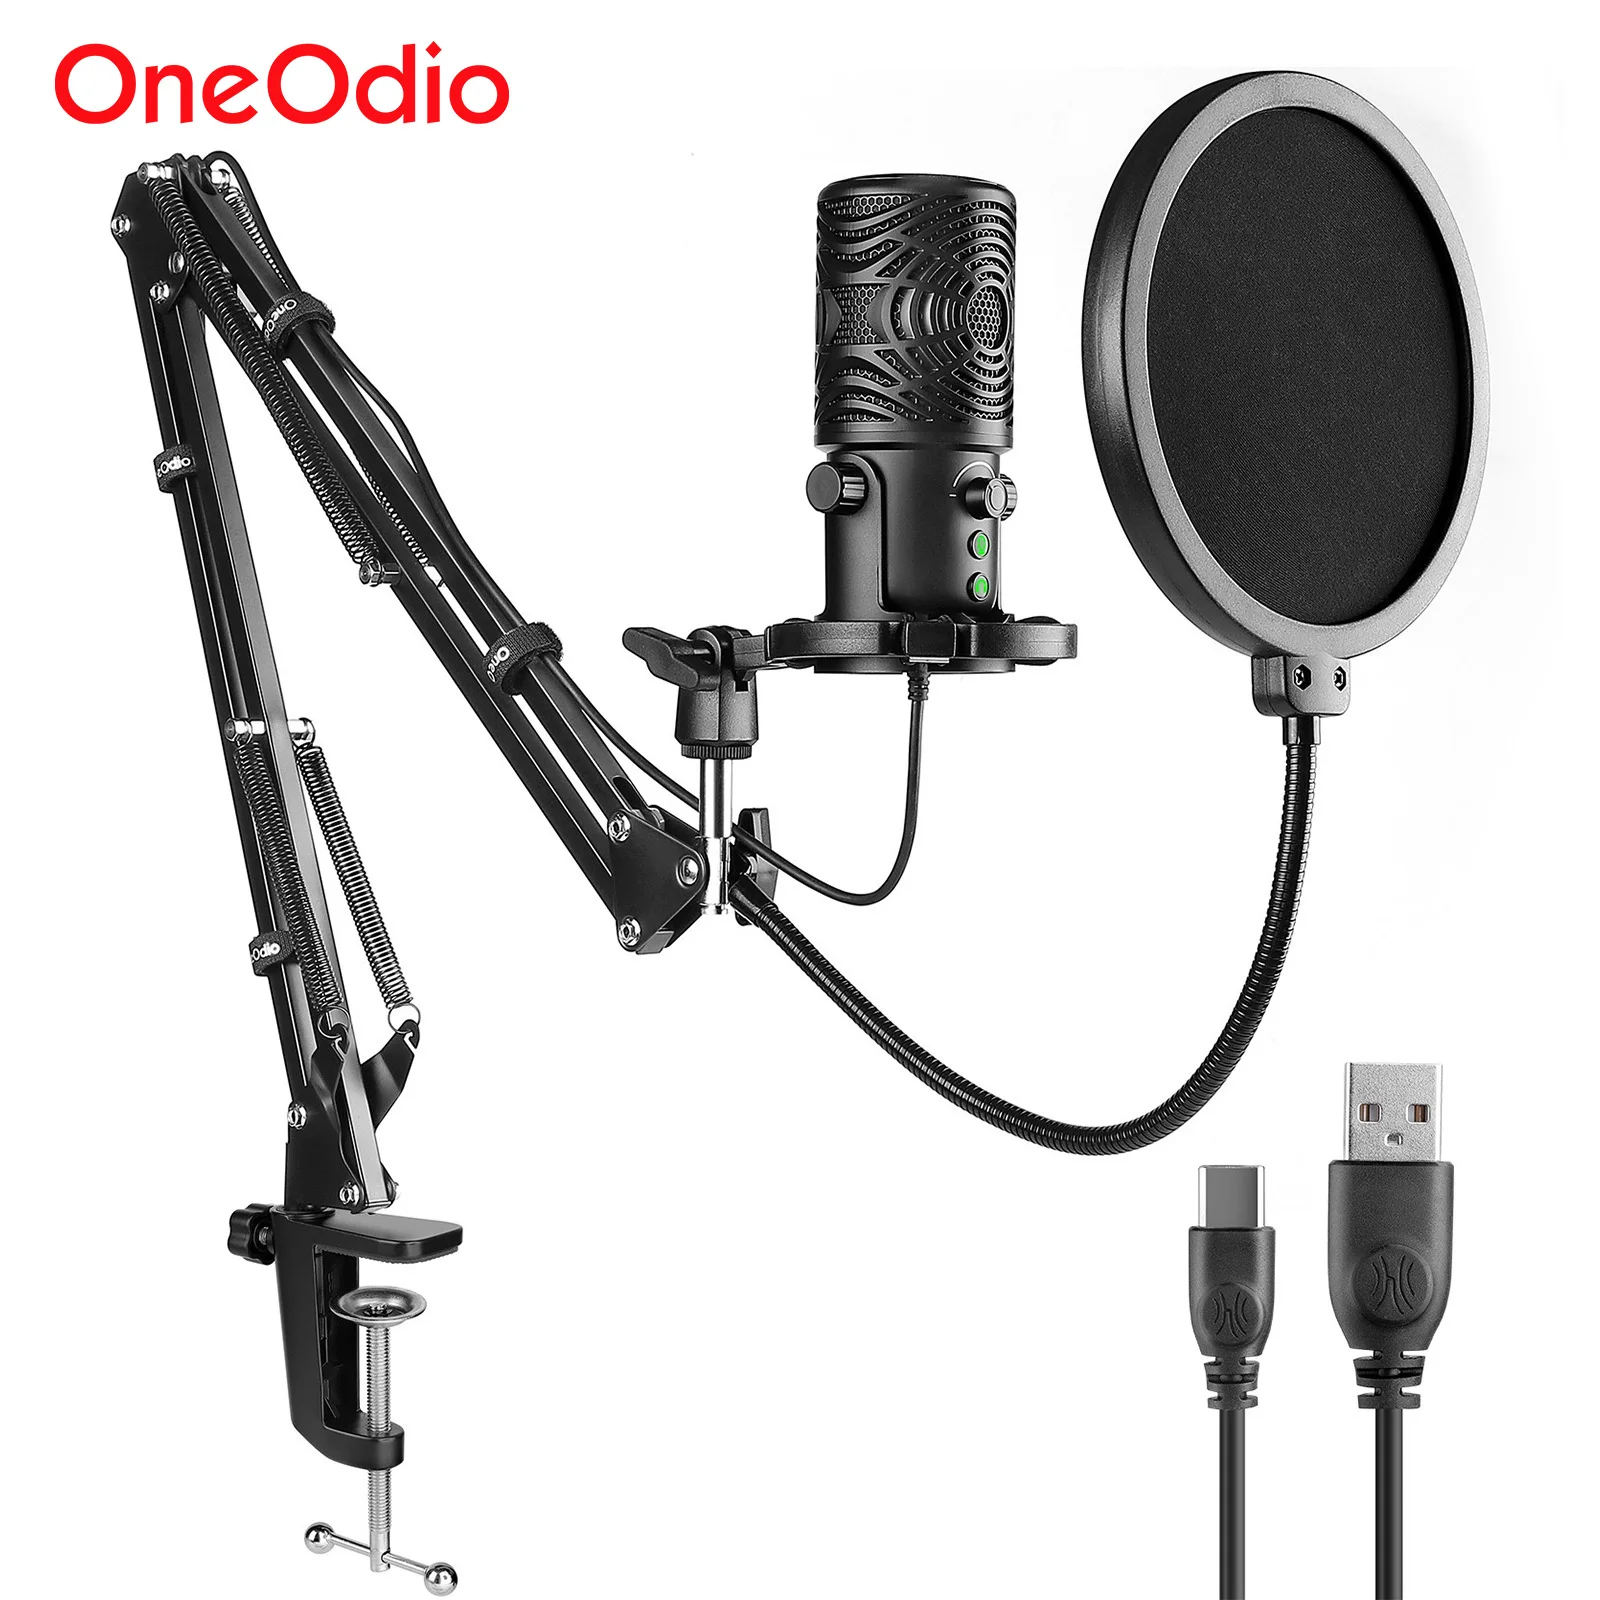 Oneodio FM1-T USB Gaming Microphone Kit Professional Studio Condenser Mic Set For PC Podcast Youtube Recording Live Streaming enlarge